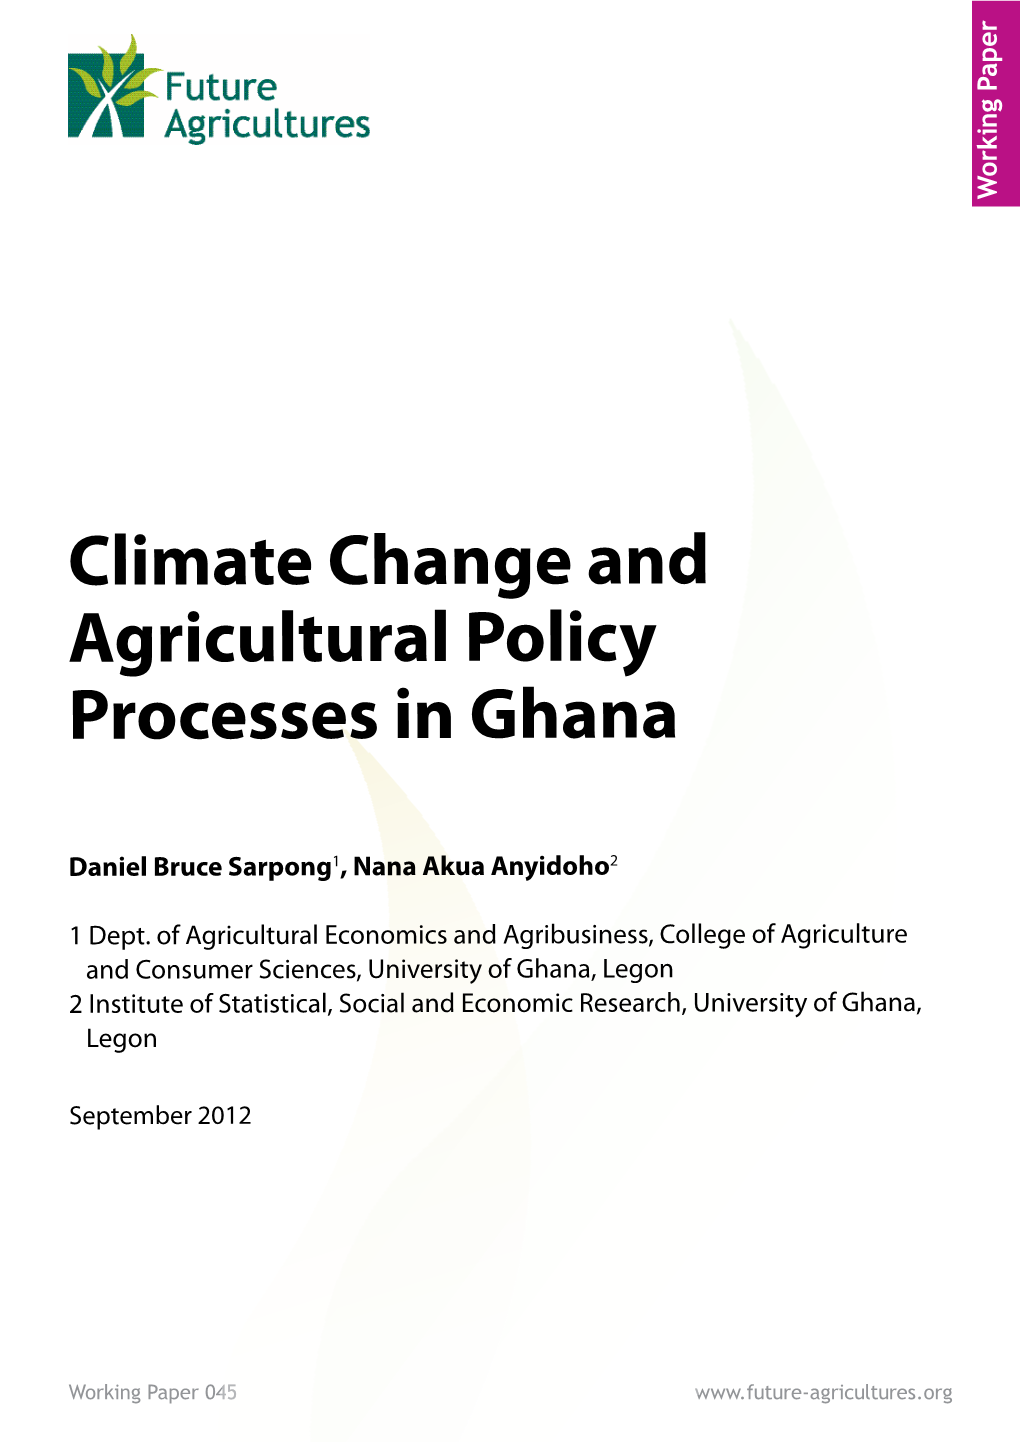 Climate Change and Agricultural Policy Processes in Ghana